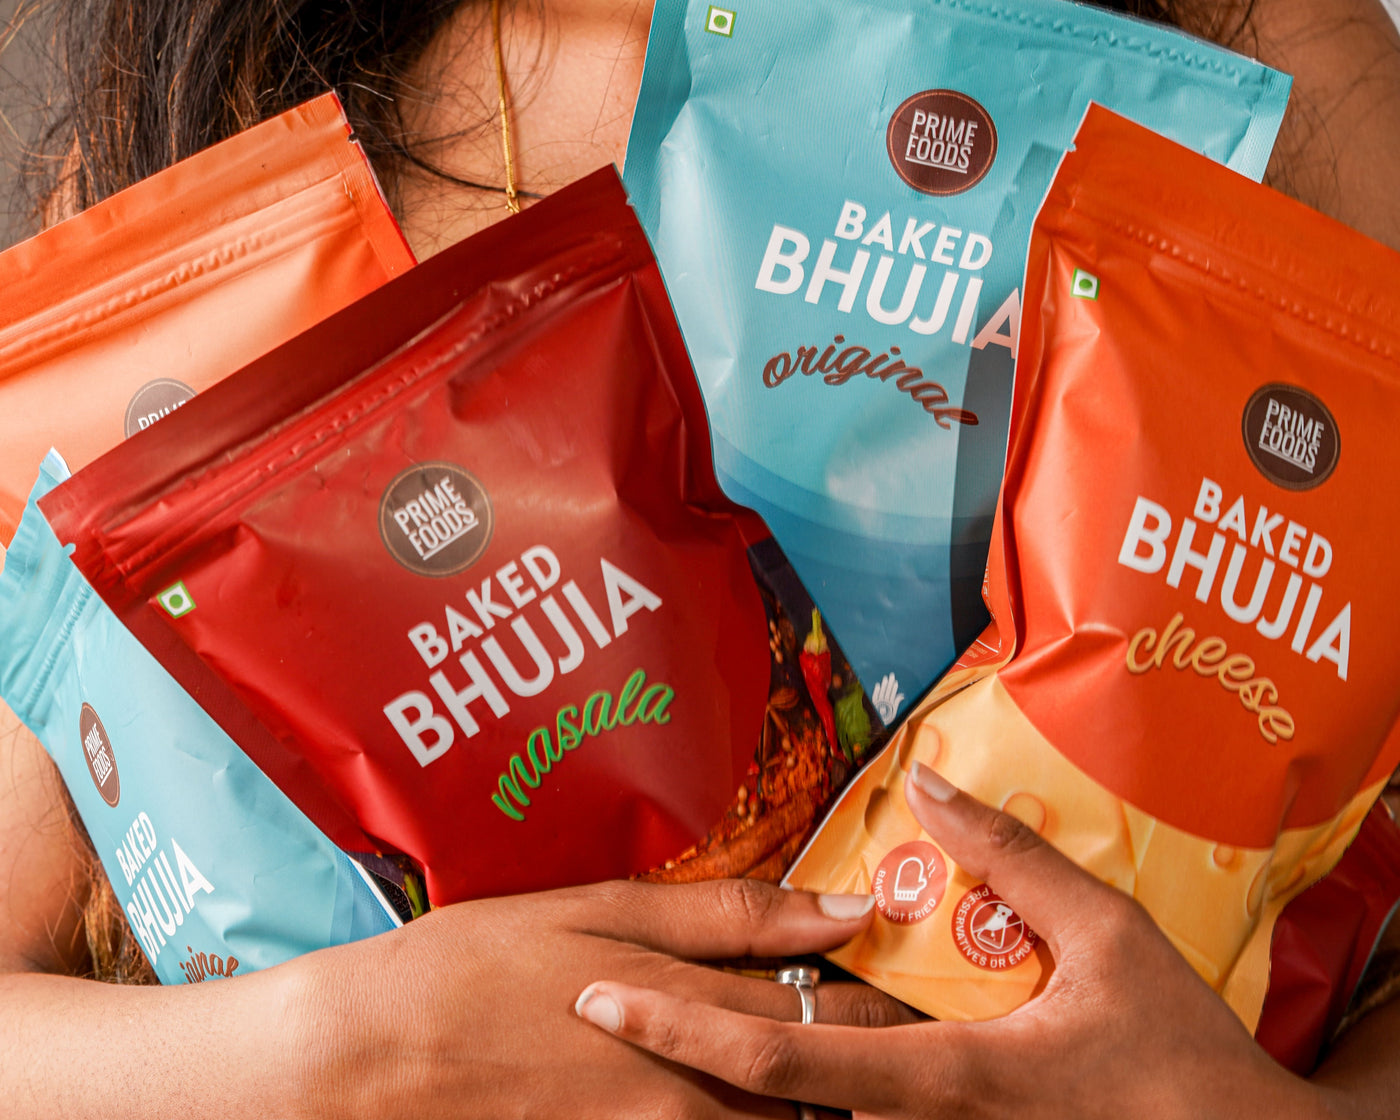 Baked Bhujia Assorted (75g) (Set of 3) (3x75g)